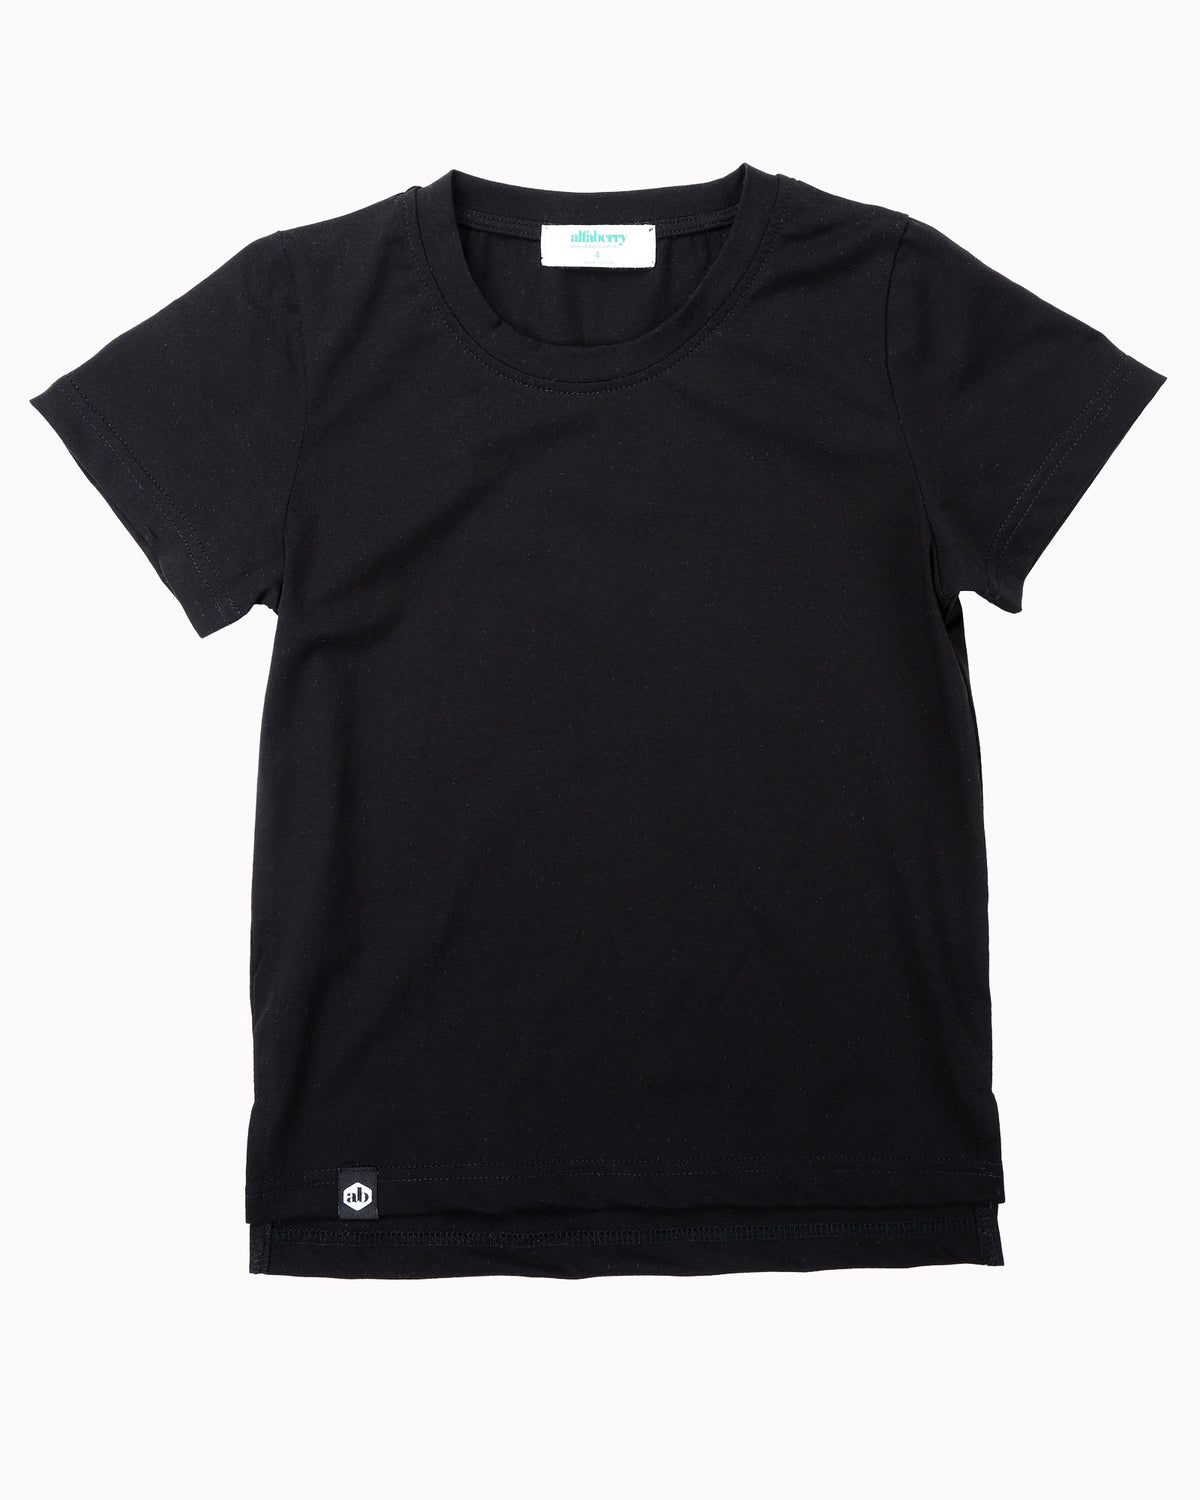 Buddy Tall Tee In Black Front